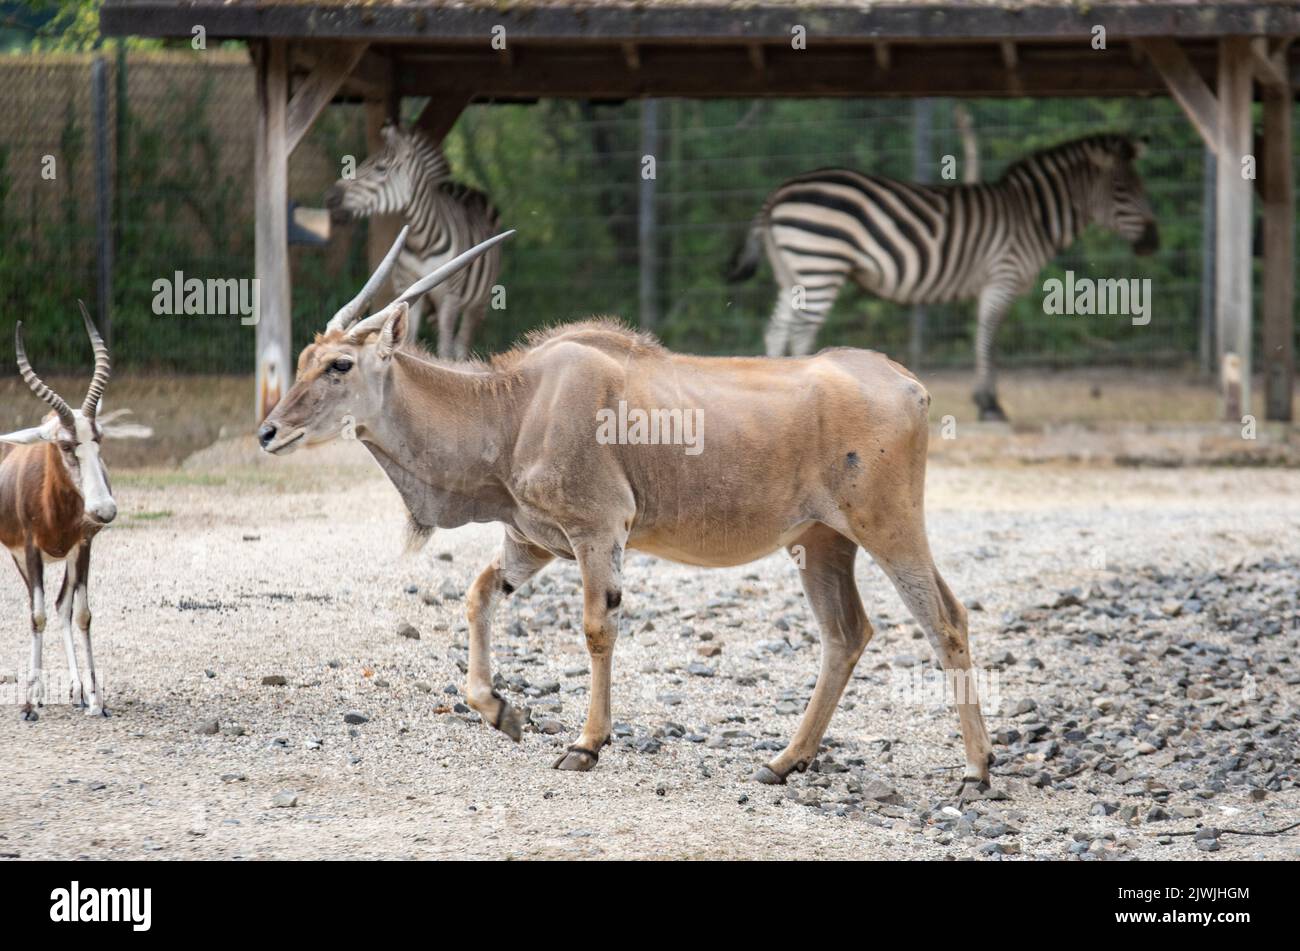 The eland, also called eland, is an antelope living in Africa. Together with the giant eland, which is not larger but has longer horns, it forms the g Stock Photo